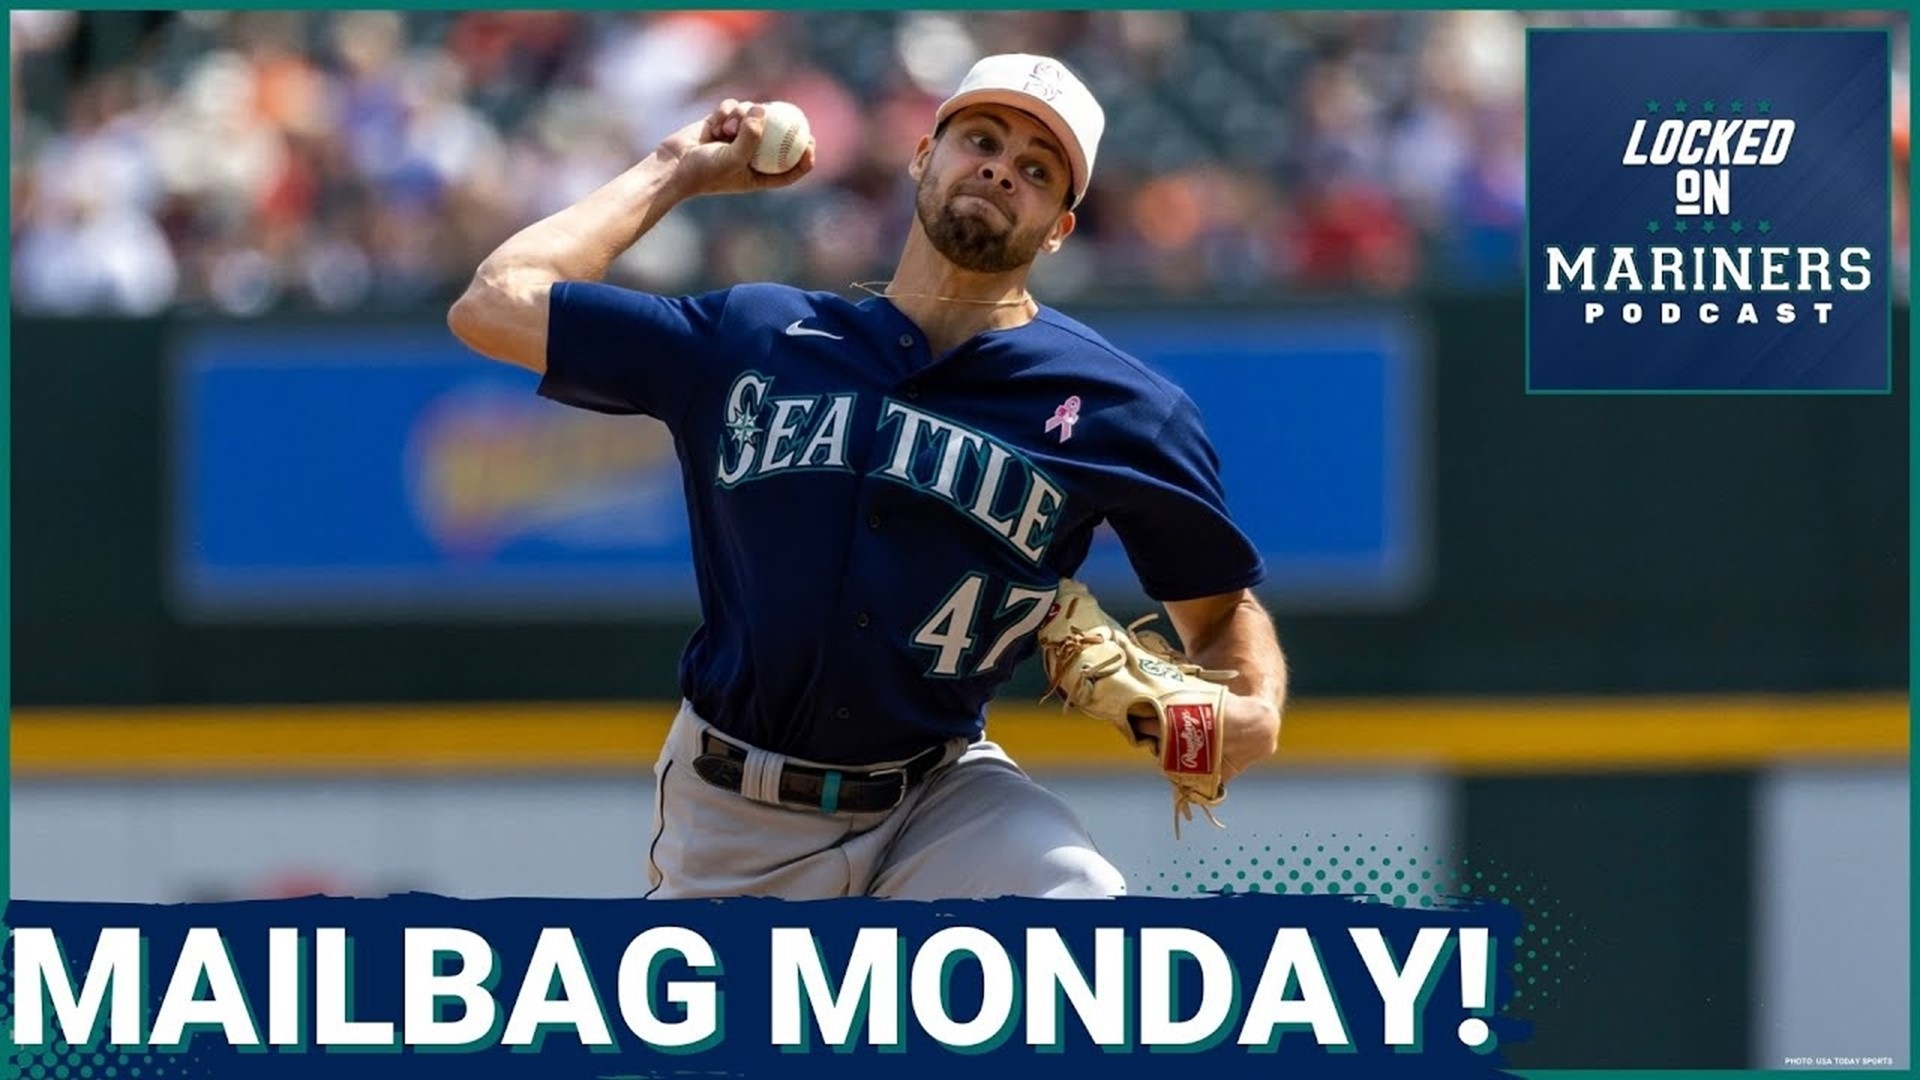 It's time for our weekly mailbag episode! On today's show, the guys discuss the struggling Matt Brash, Chris Flexen's role, Eugenio Suarez's lack of power.